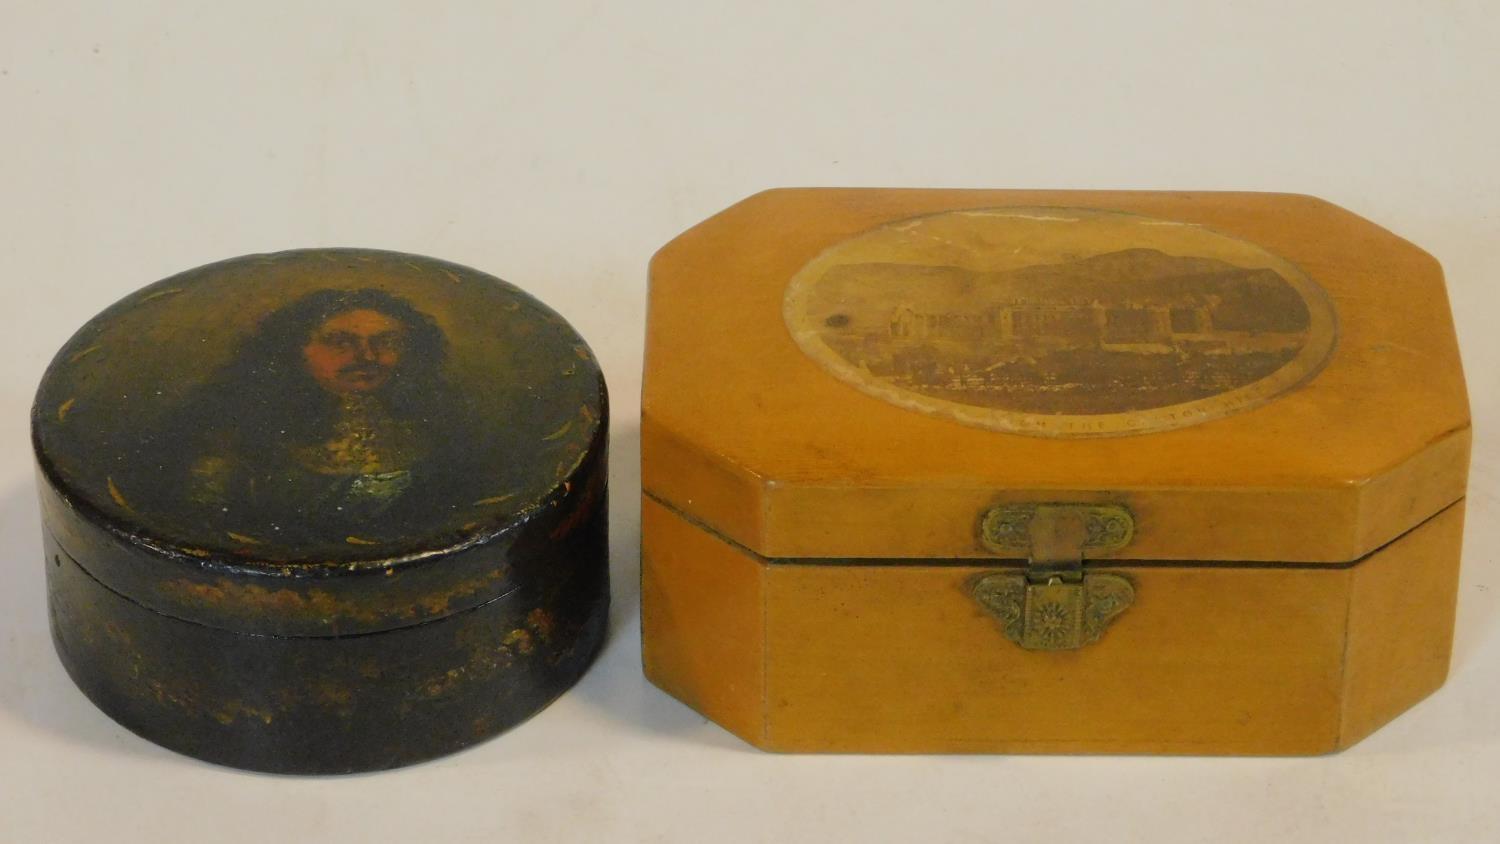 A 19th century Mauchlineware lidded box, Edinburgh Castle and Ross Fountain along with a 19th